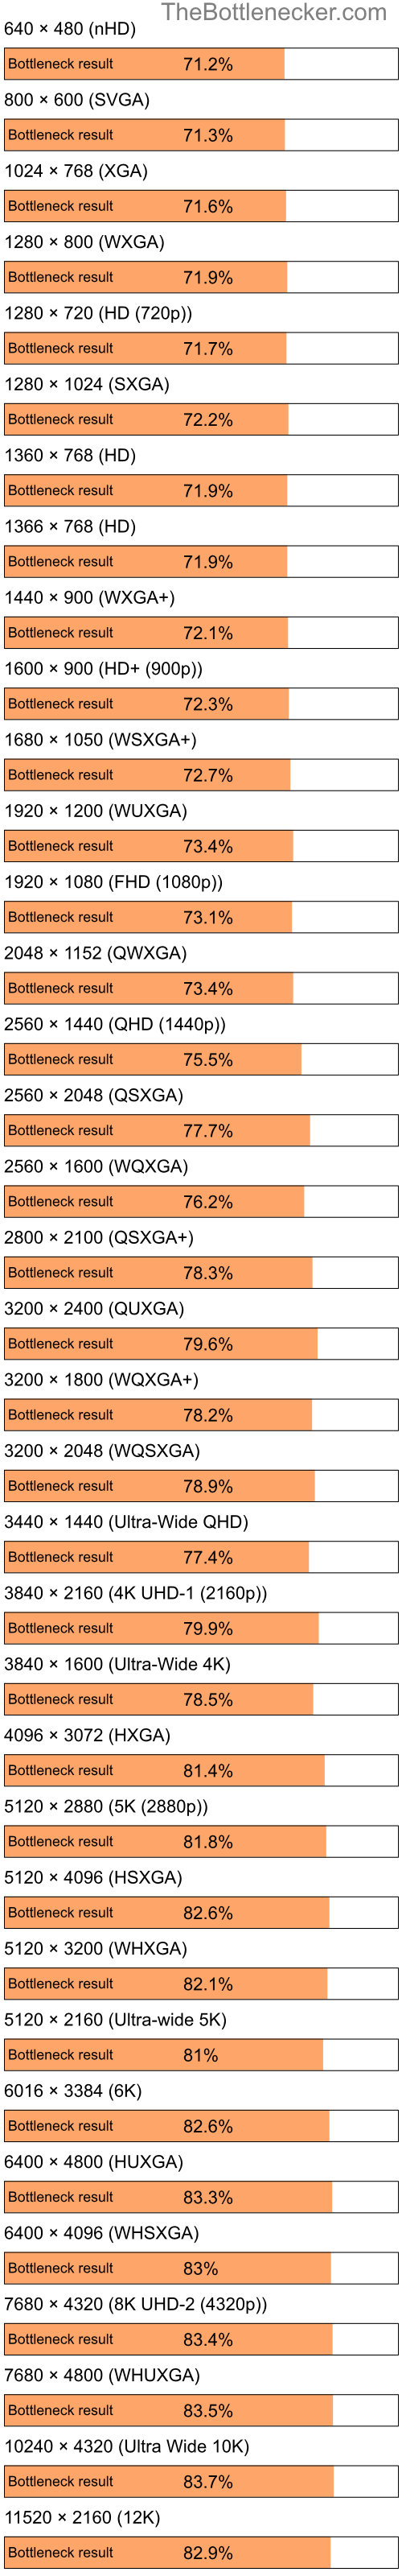 Bottleneck results by resolution for Intel Pentium 4 and NVIDIA GeForce 8600 GS in Graphic Card Intense Tasks